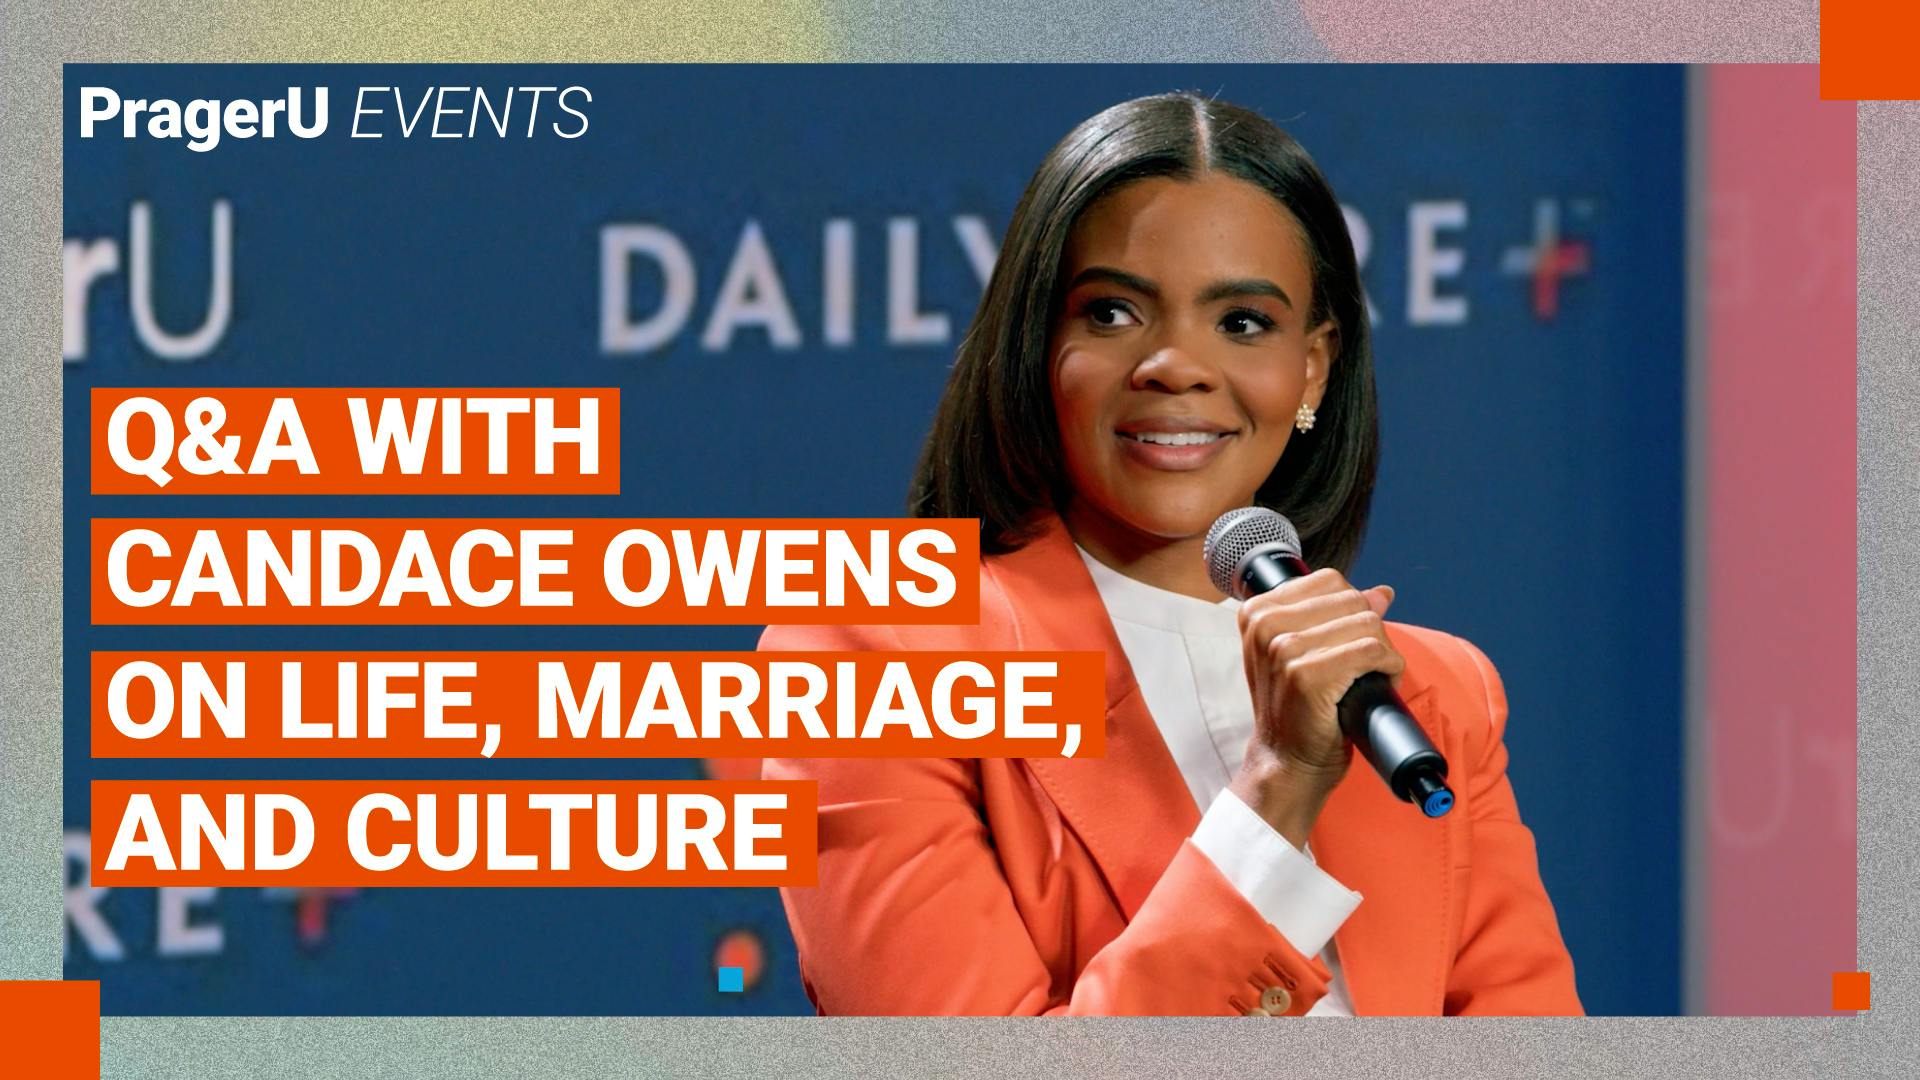 Q&A with Candace Owens on Life, Marriage, and Culture